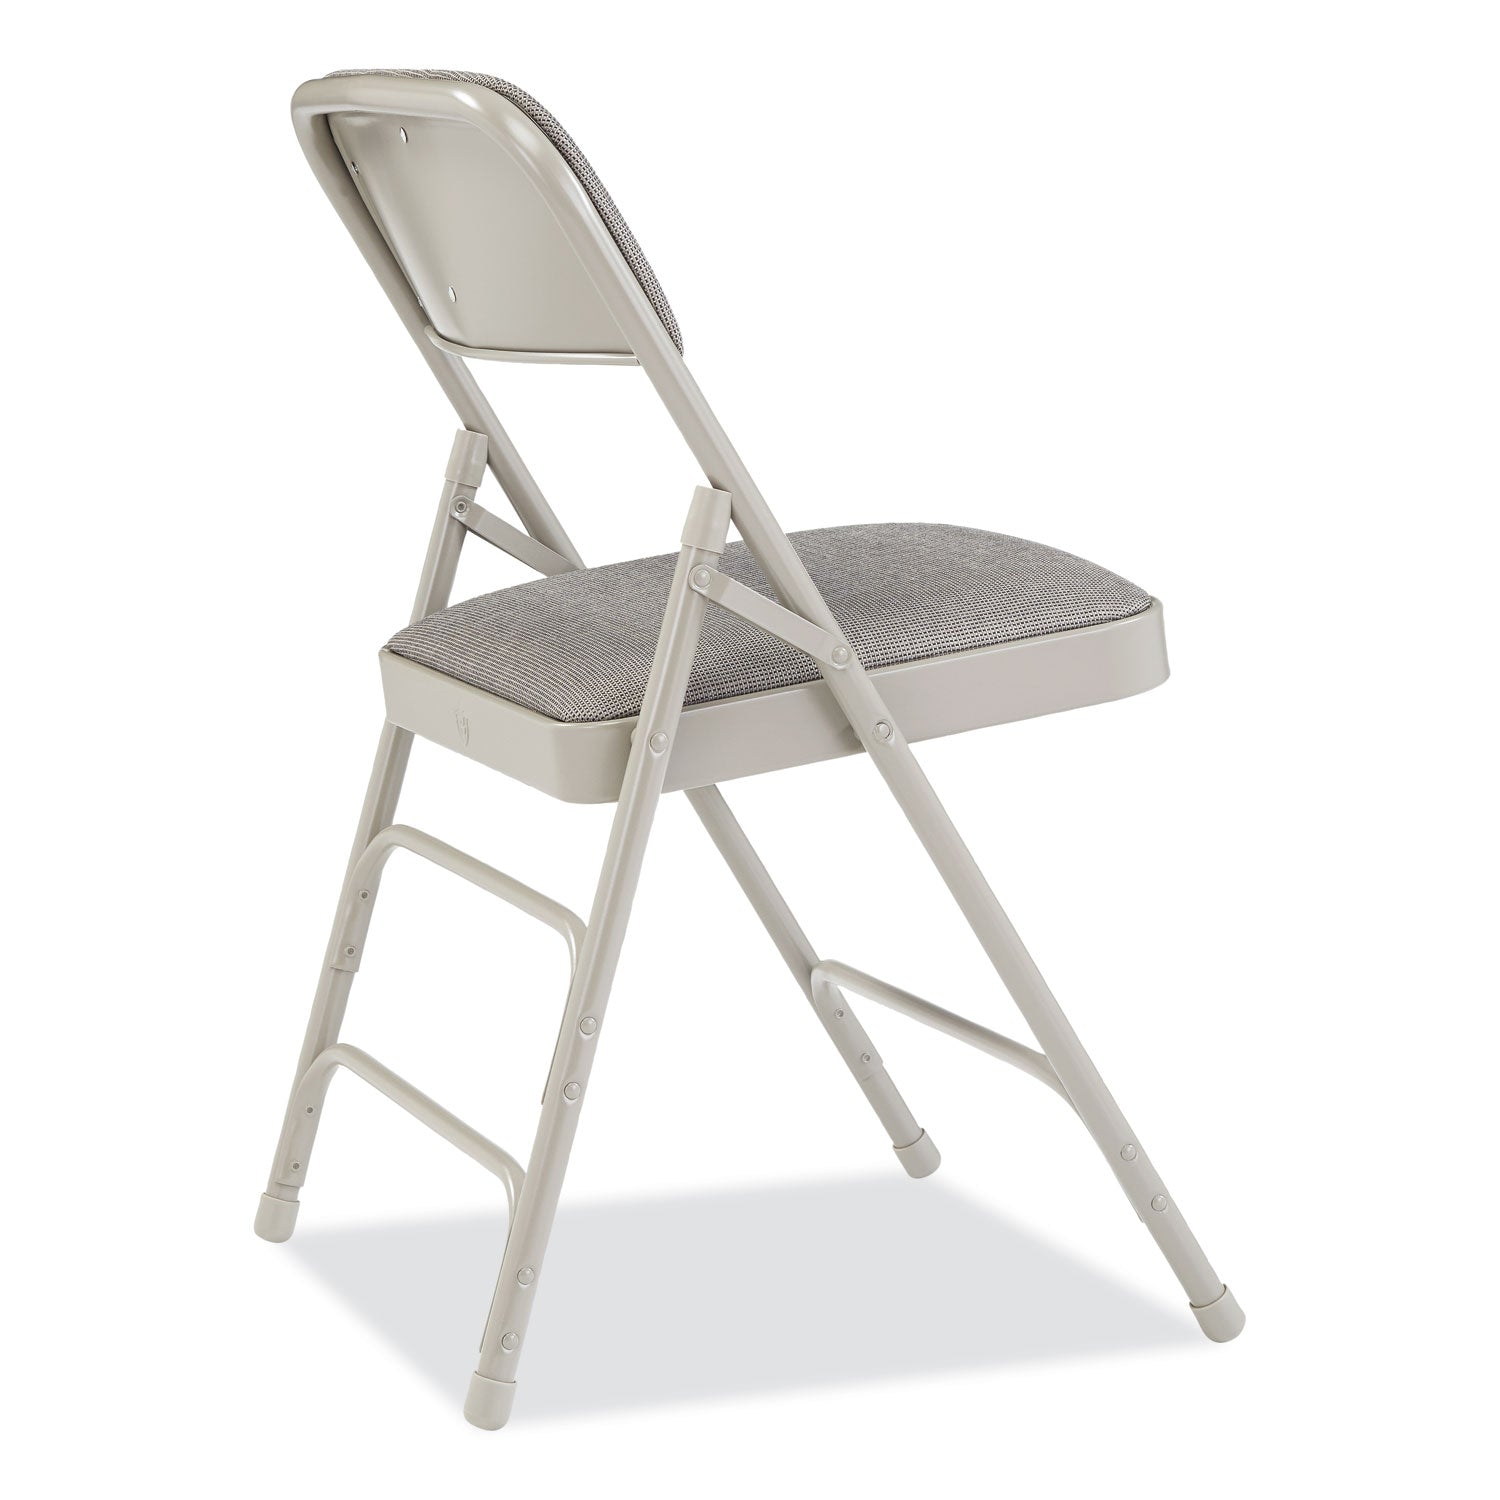 2300-series-fabric-triple-brace-double-hinge-premium-folding-chair-supports-500-lb-greystone-4-ct-ships-in-1-3-bus-days_nps2302 - 4